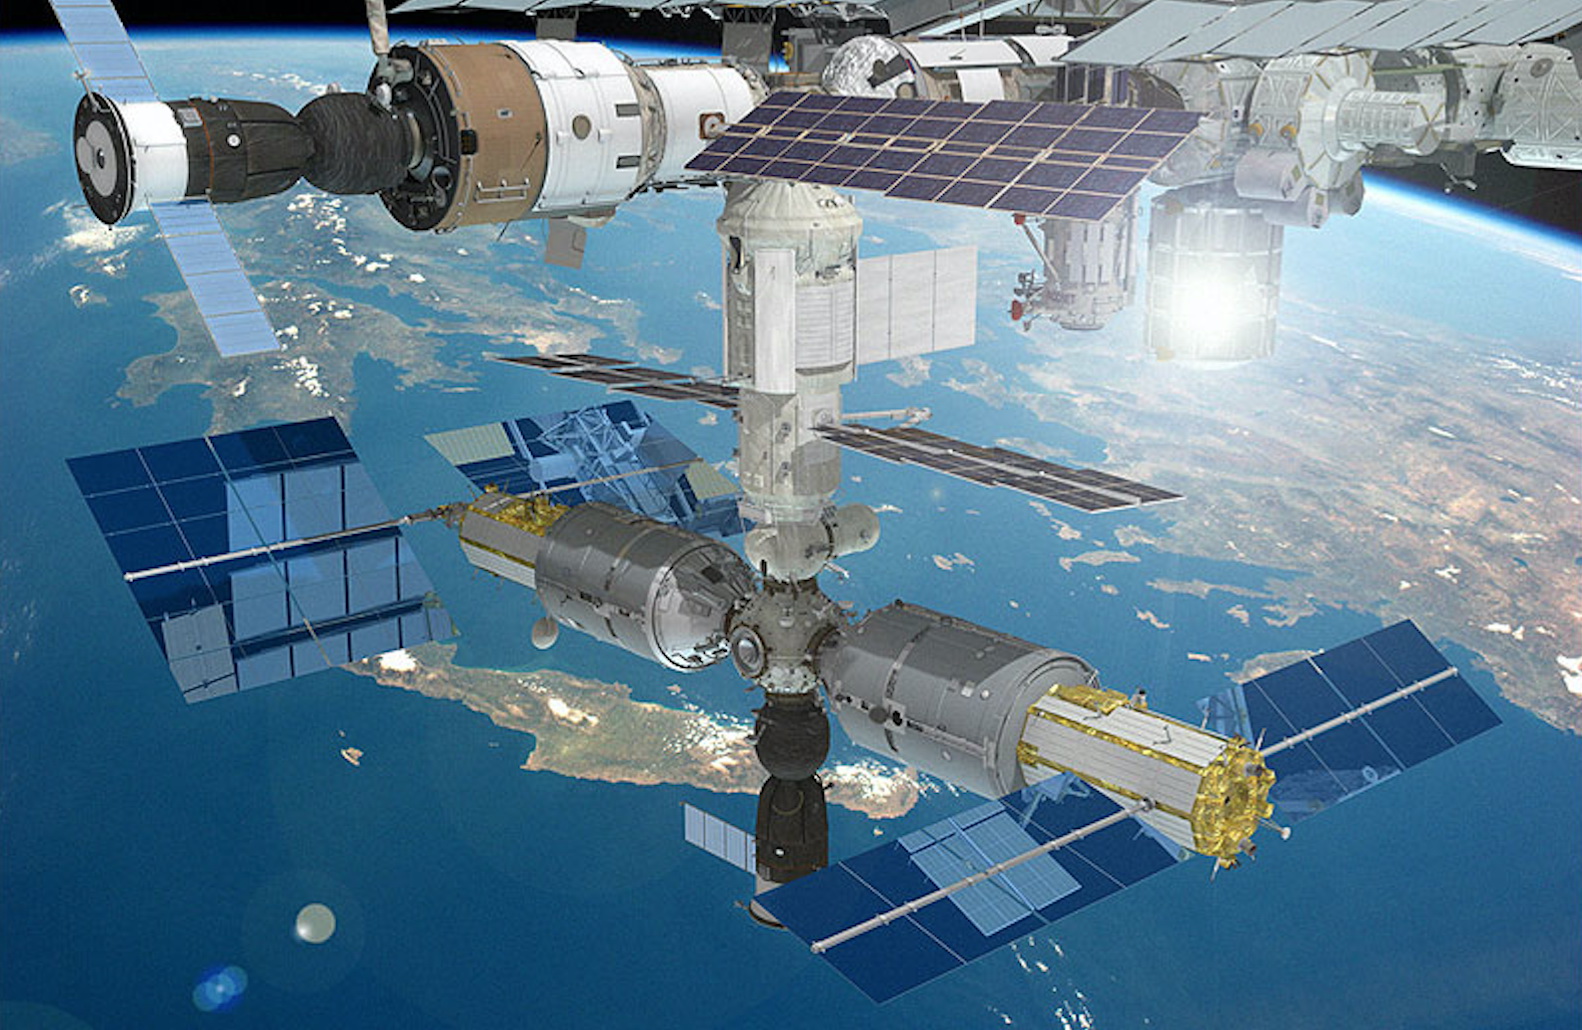 Russia wants to turn the ISS into a hotel for wealthy tourists